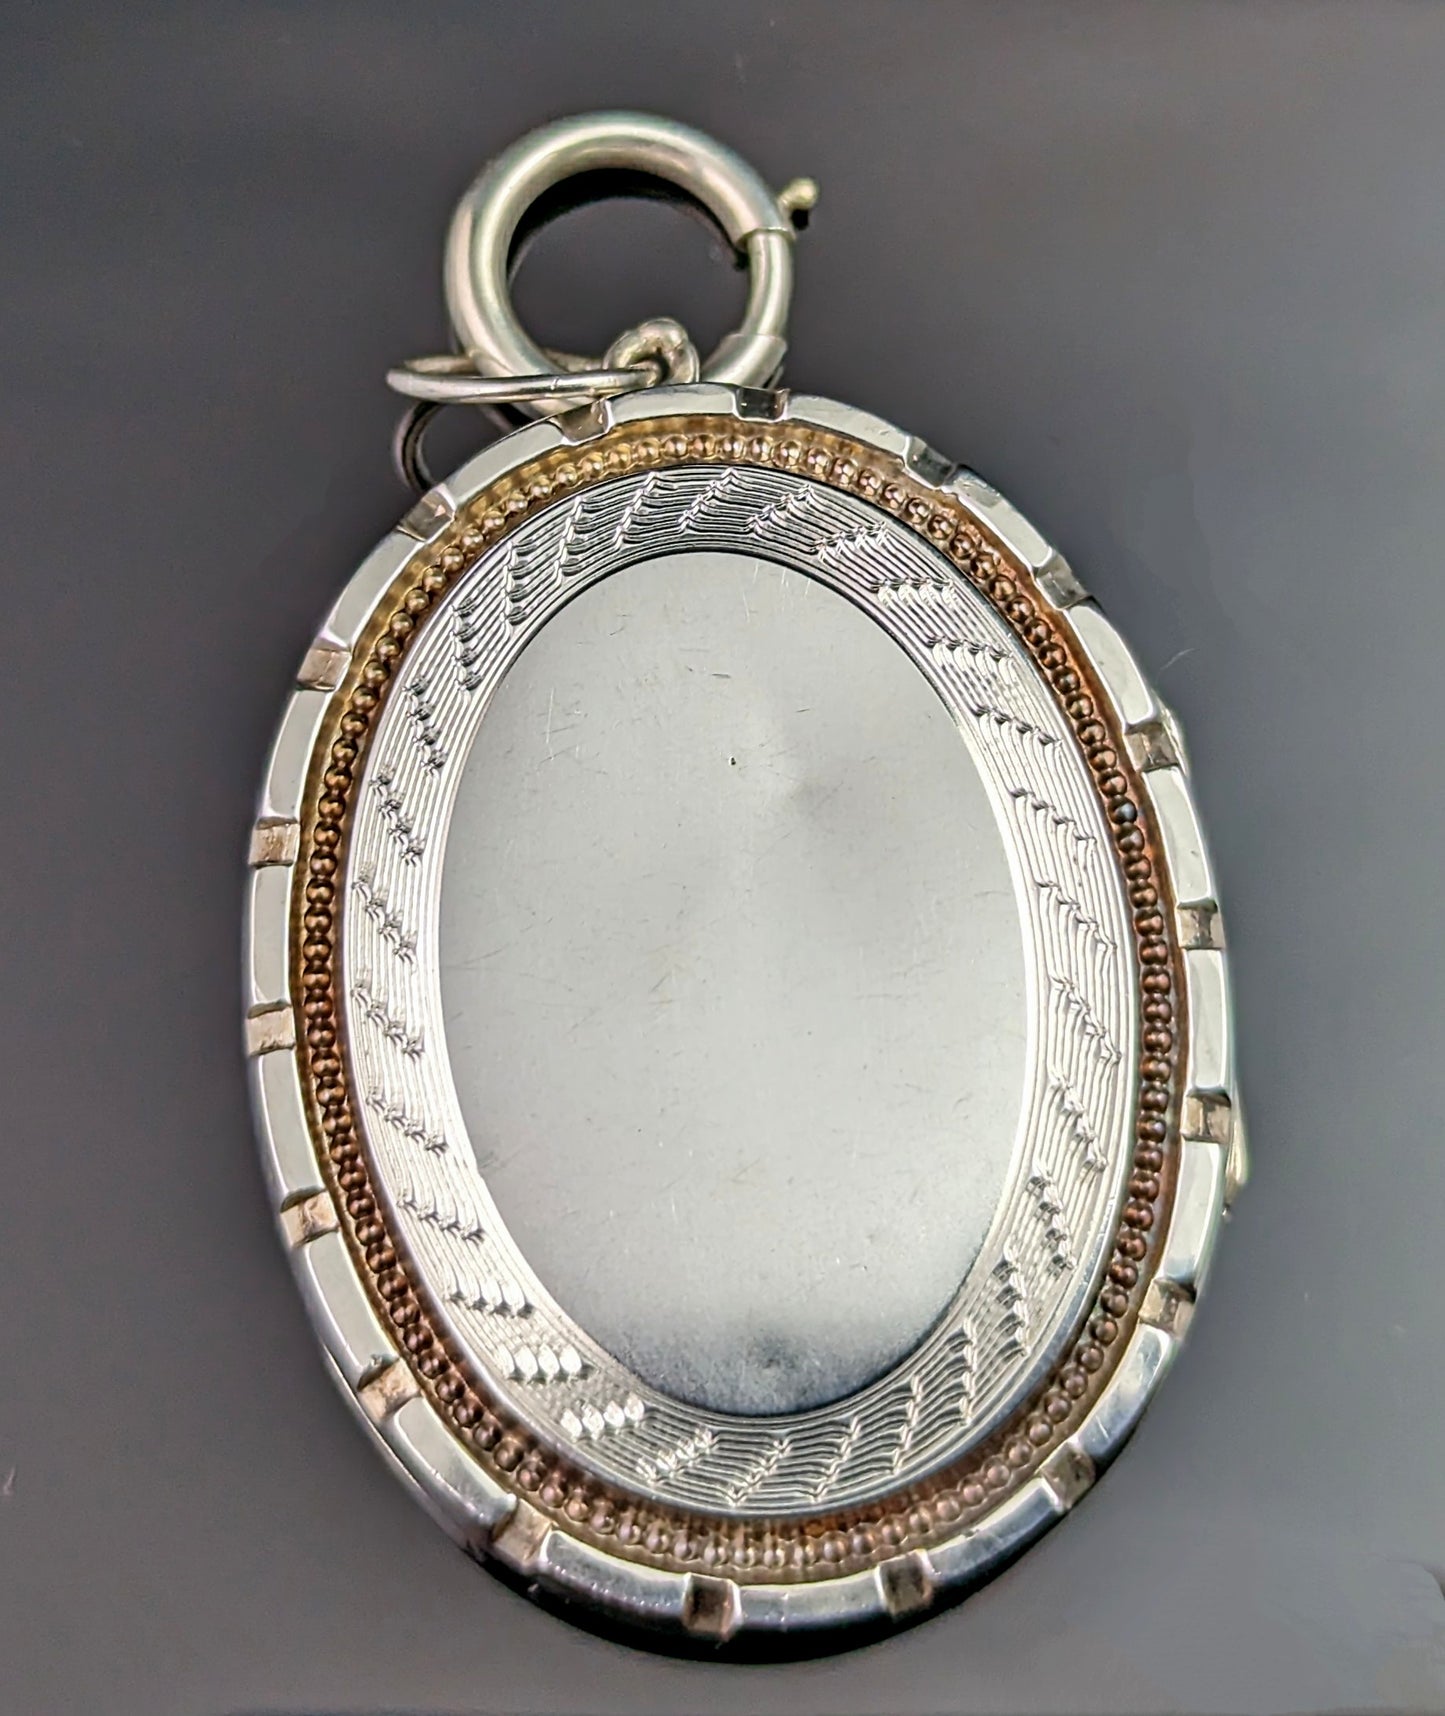 Antique Victorian locket pendant, Silver and 9ct gold, Aesthetic Roses